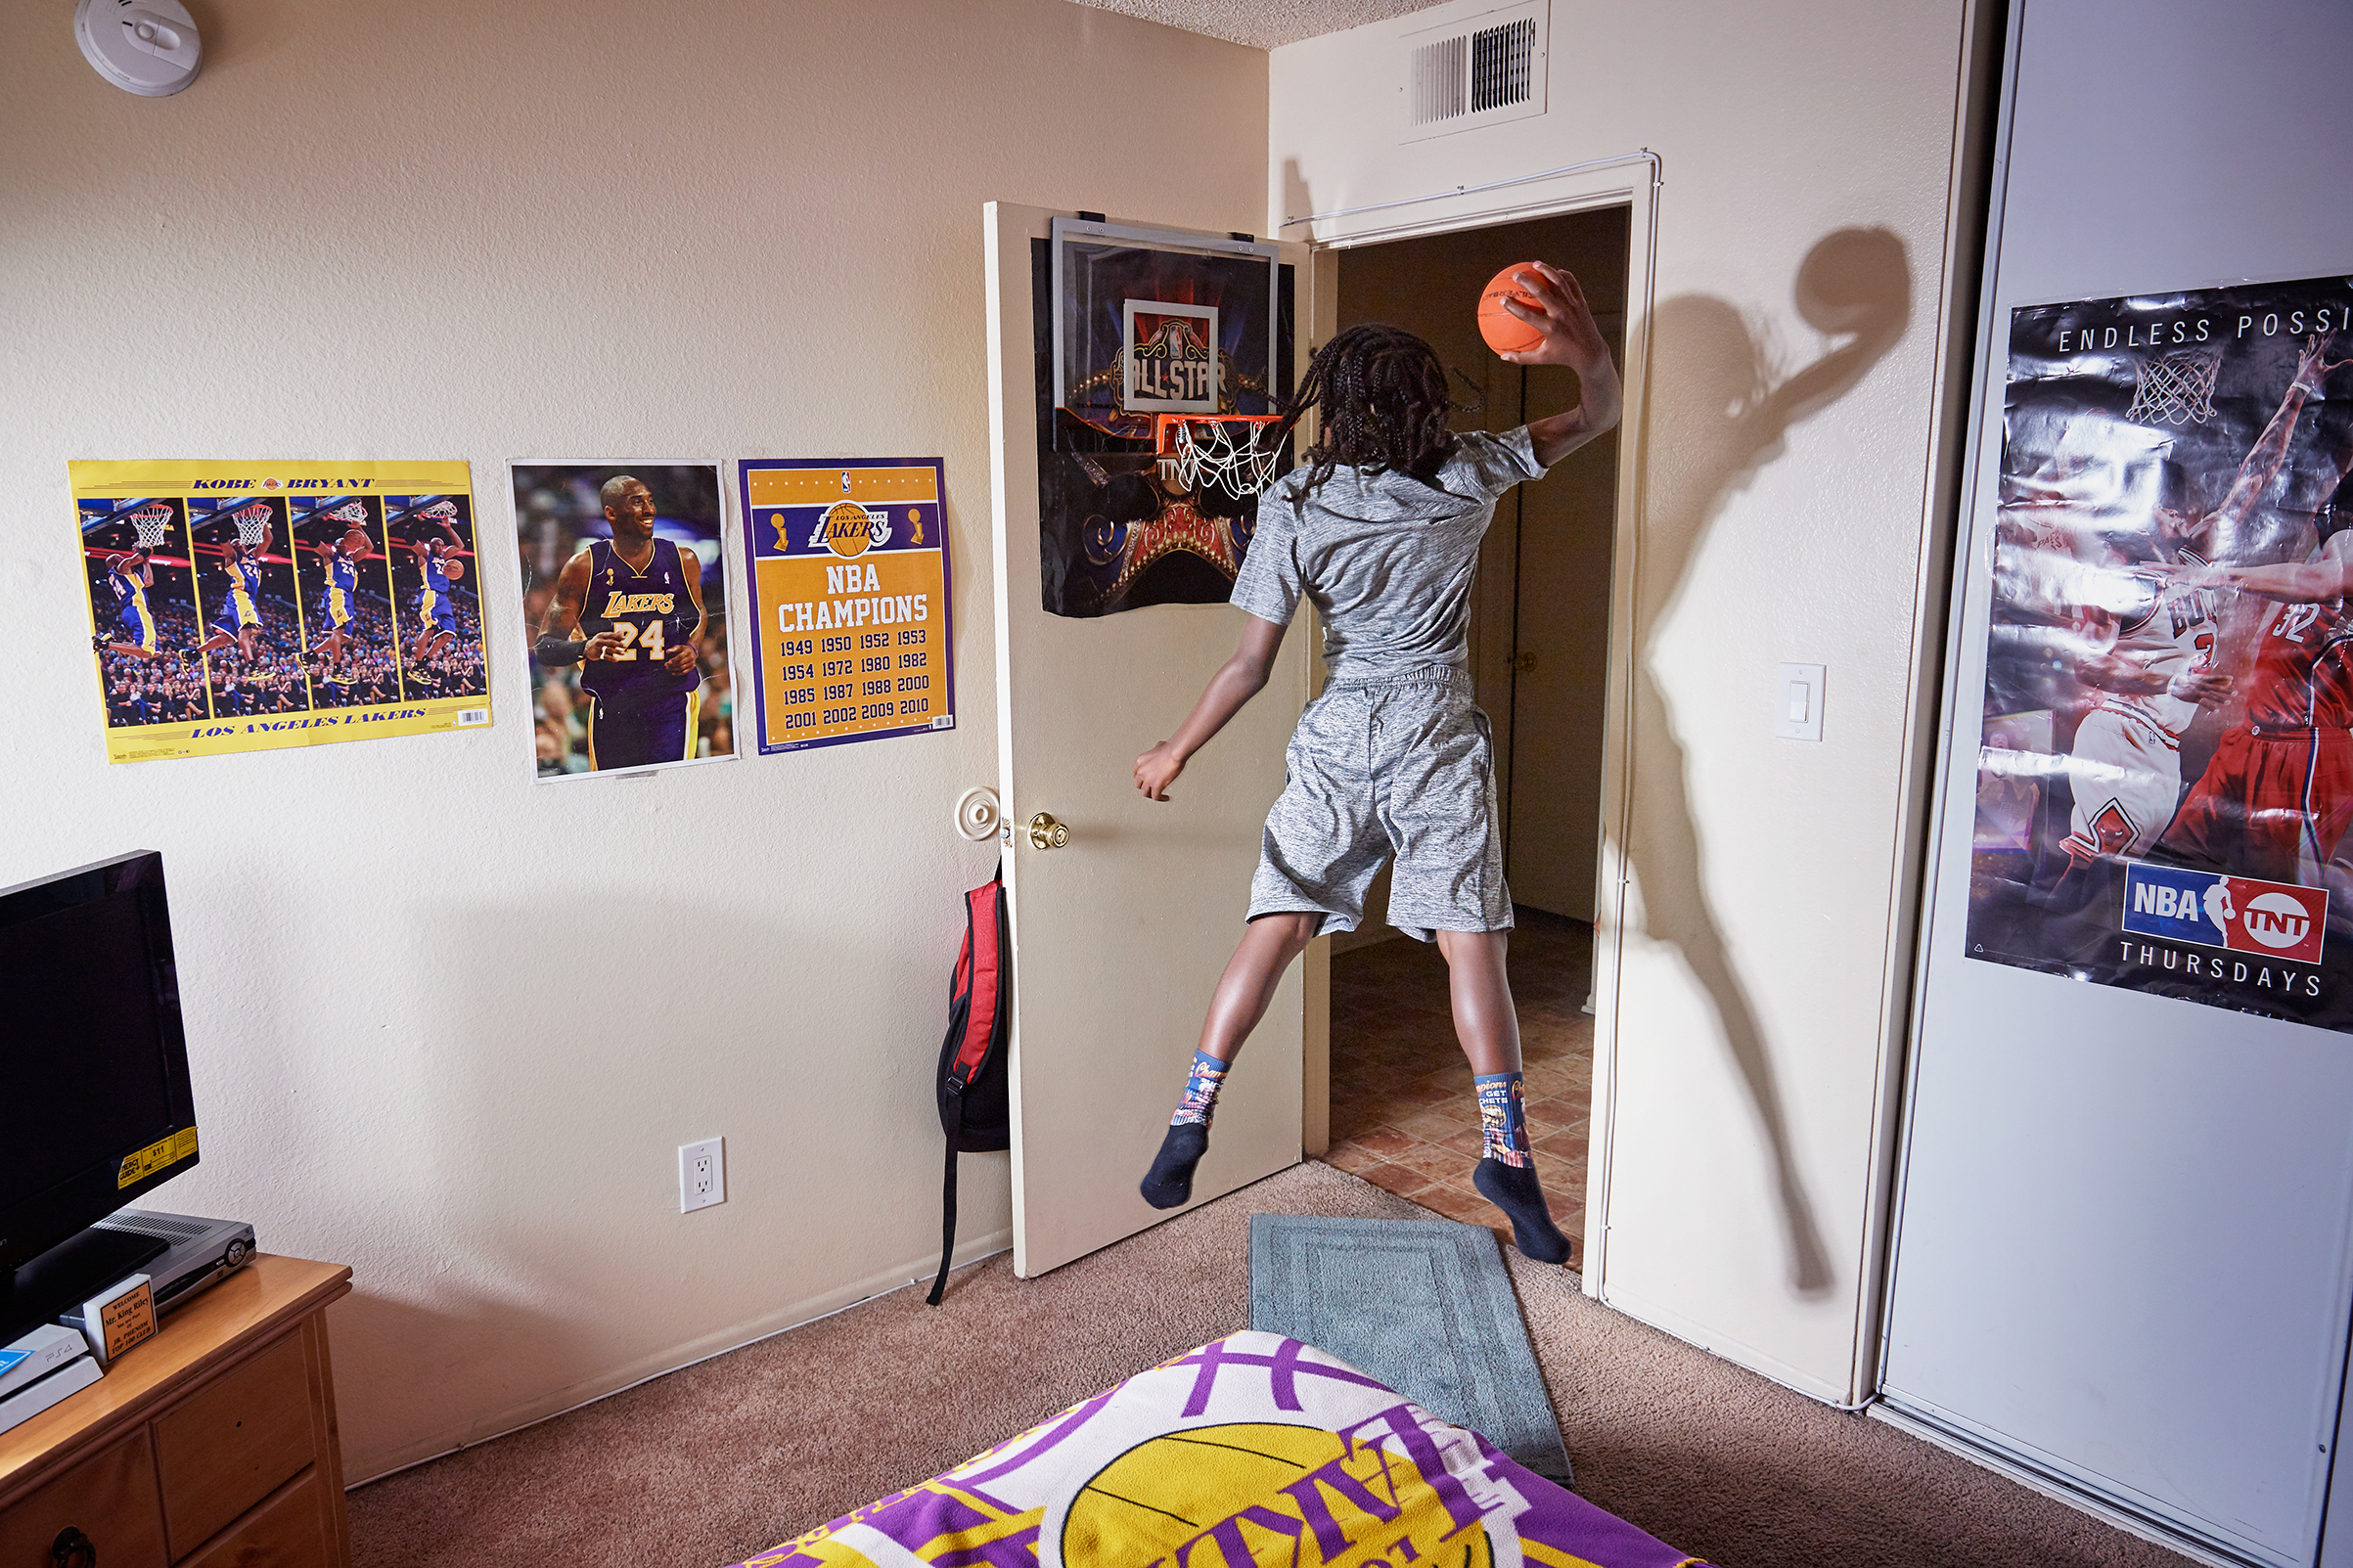 King-Riley Owens, 9, who is ranked as a five-star prospect by the National Youth Basketball Report, lives in L.A. but has already played in tournaments in Utah, Texas and Nevada. His parents have used GoFundMe to help pay for the travel. If the NBA doesn’t work out, King-Riley wants to be a veterinarian. Here King-Rily is photographed at home on Aug. 2, 2017. (Finlay MacKay for TIME)